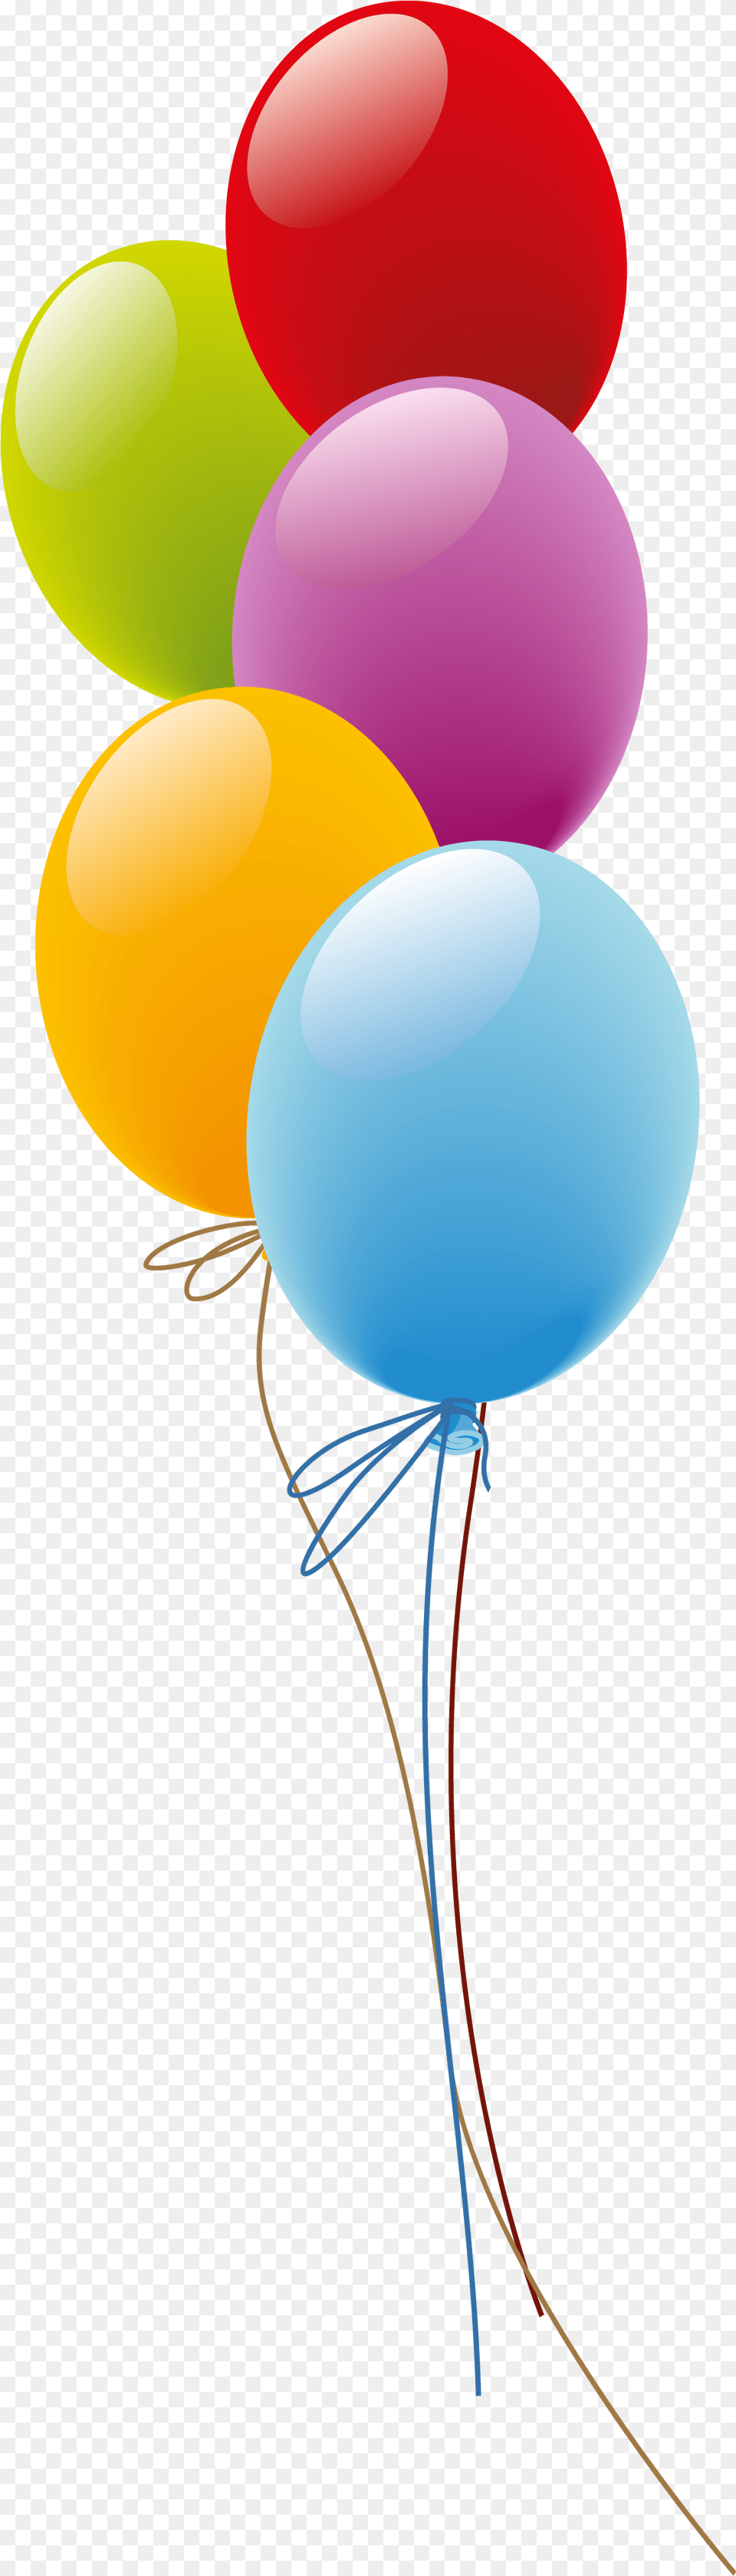 Blue Balloon Birthday Party Balloons Free Transparent Png